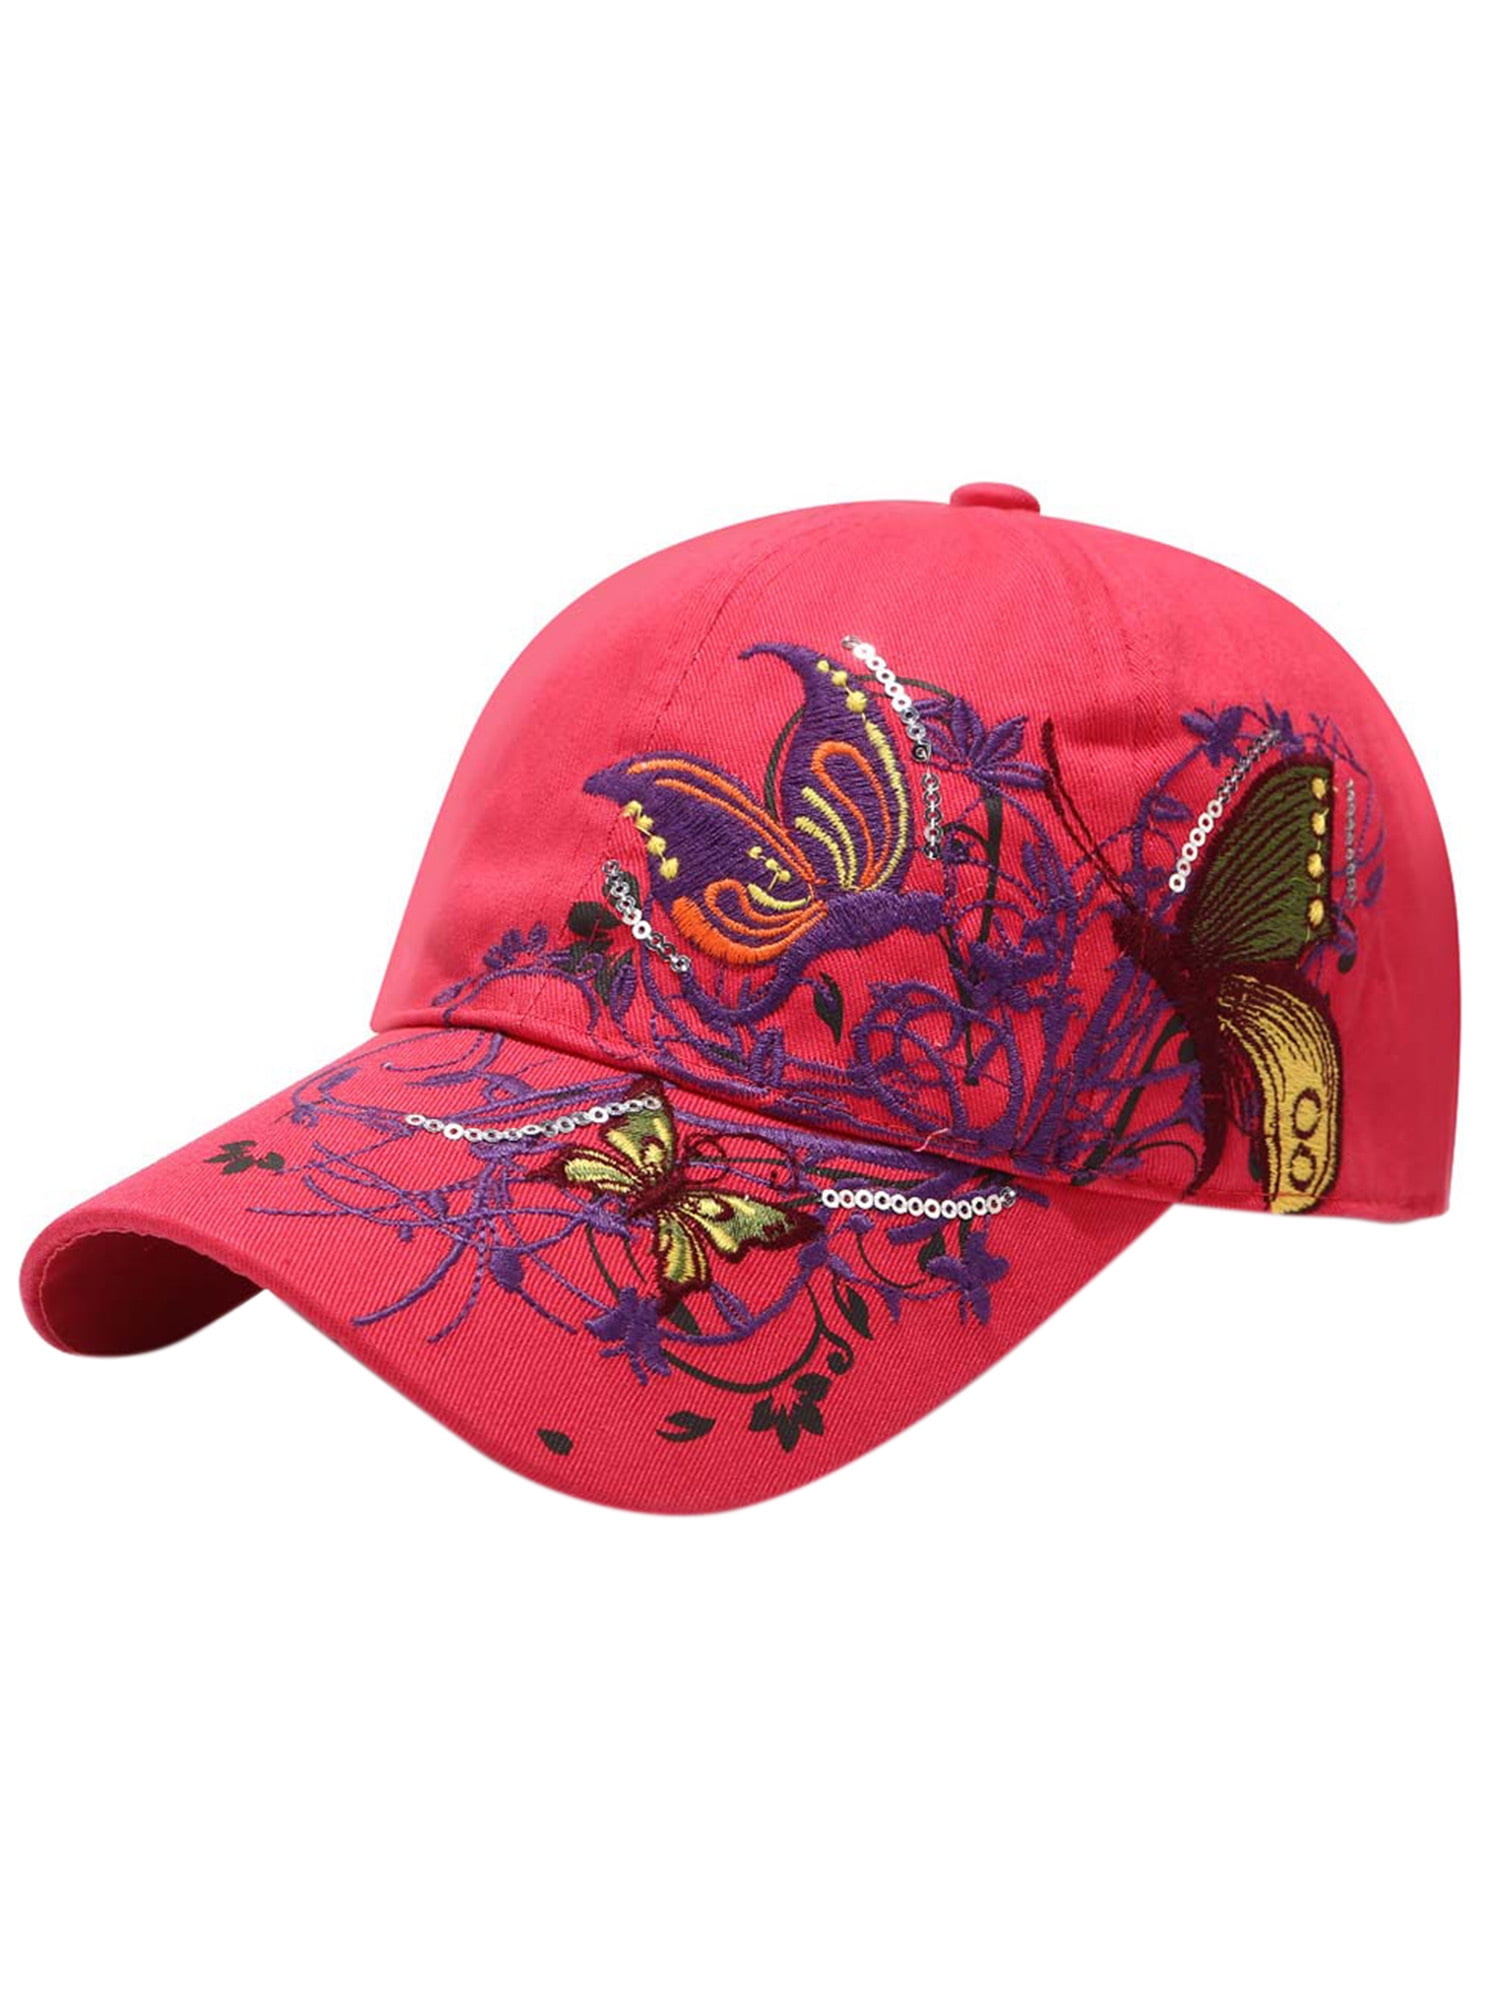 Personalised Girls Butterfly Baseball Cap With Size Adjuster,Xmas Gift/Leisure 